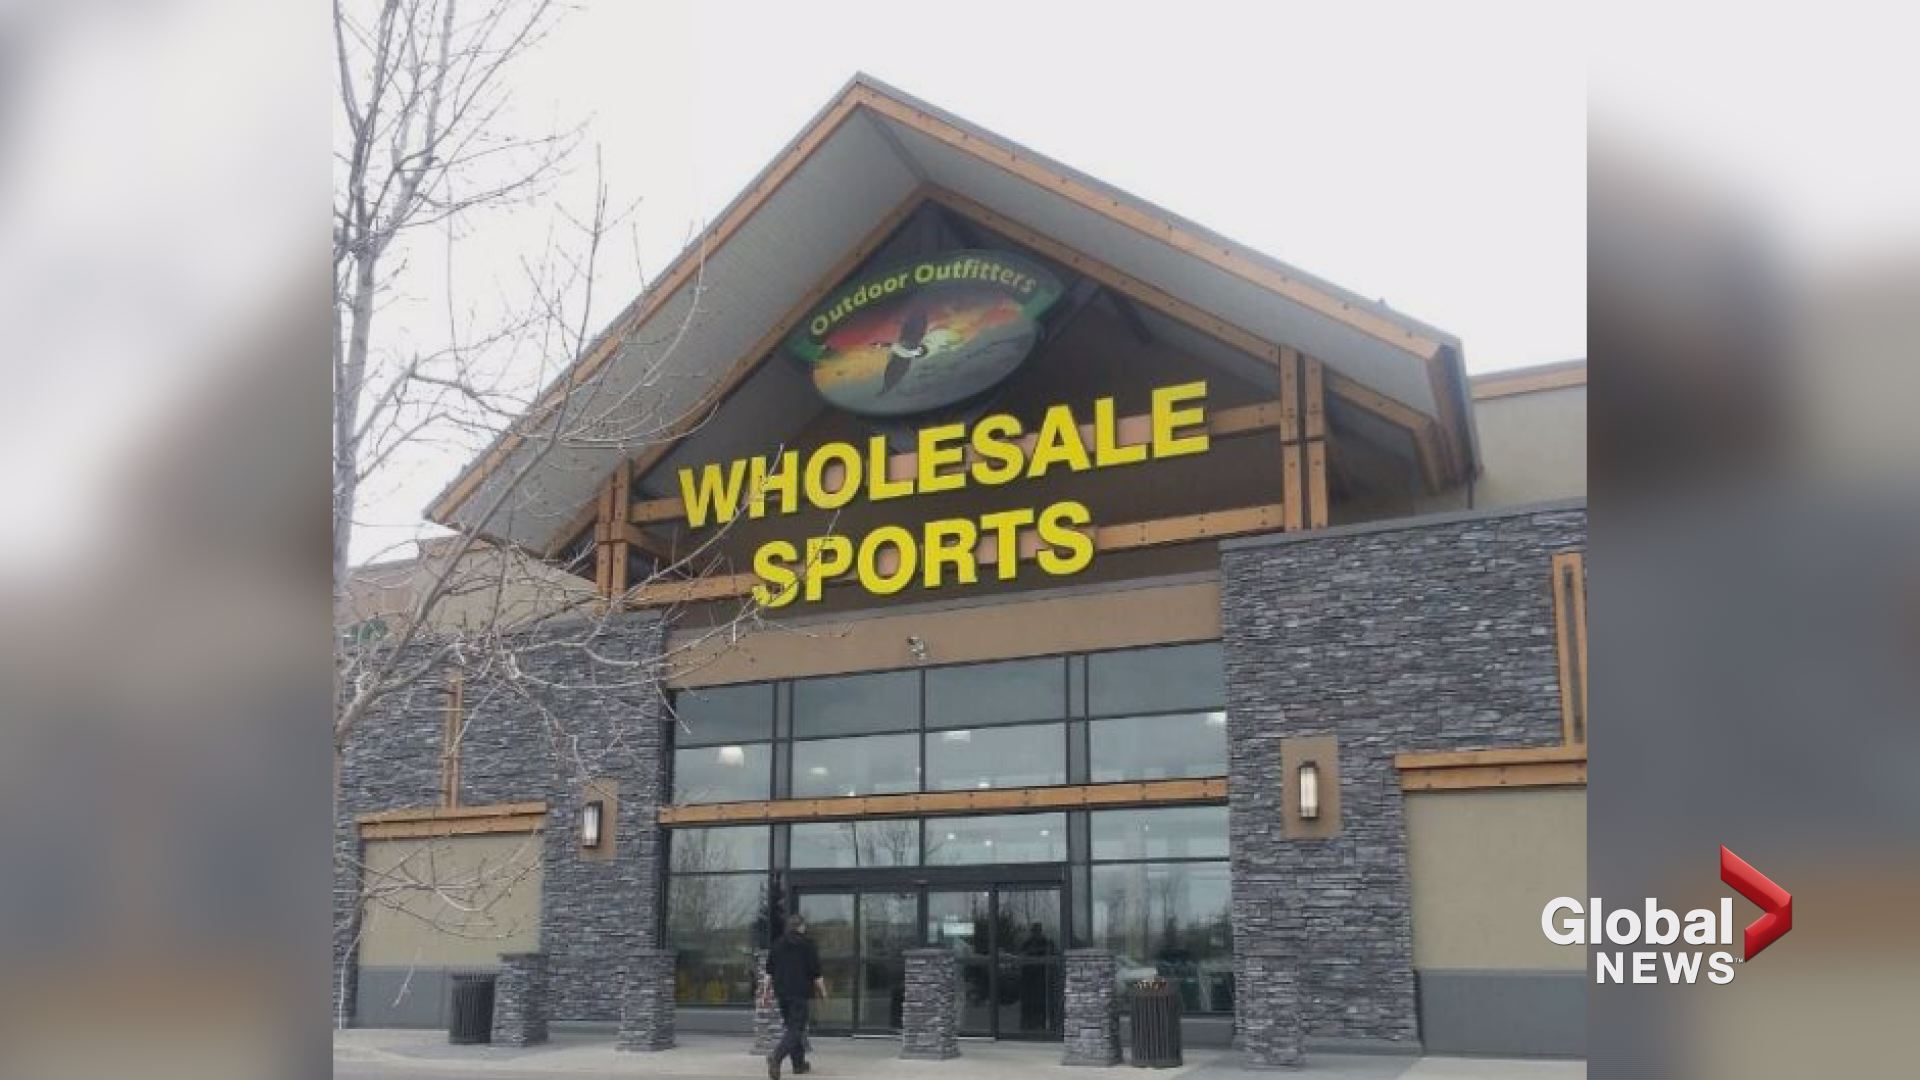 12 Wholesale Sports stores in Western Canada closing after 30 years